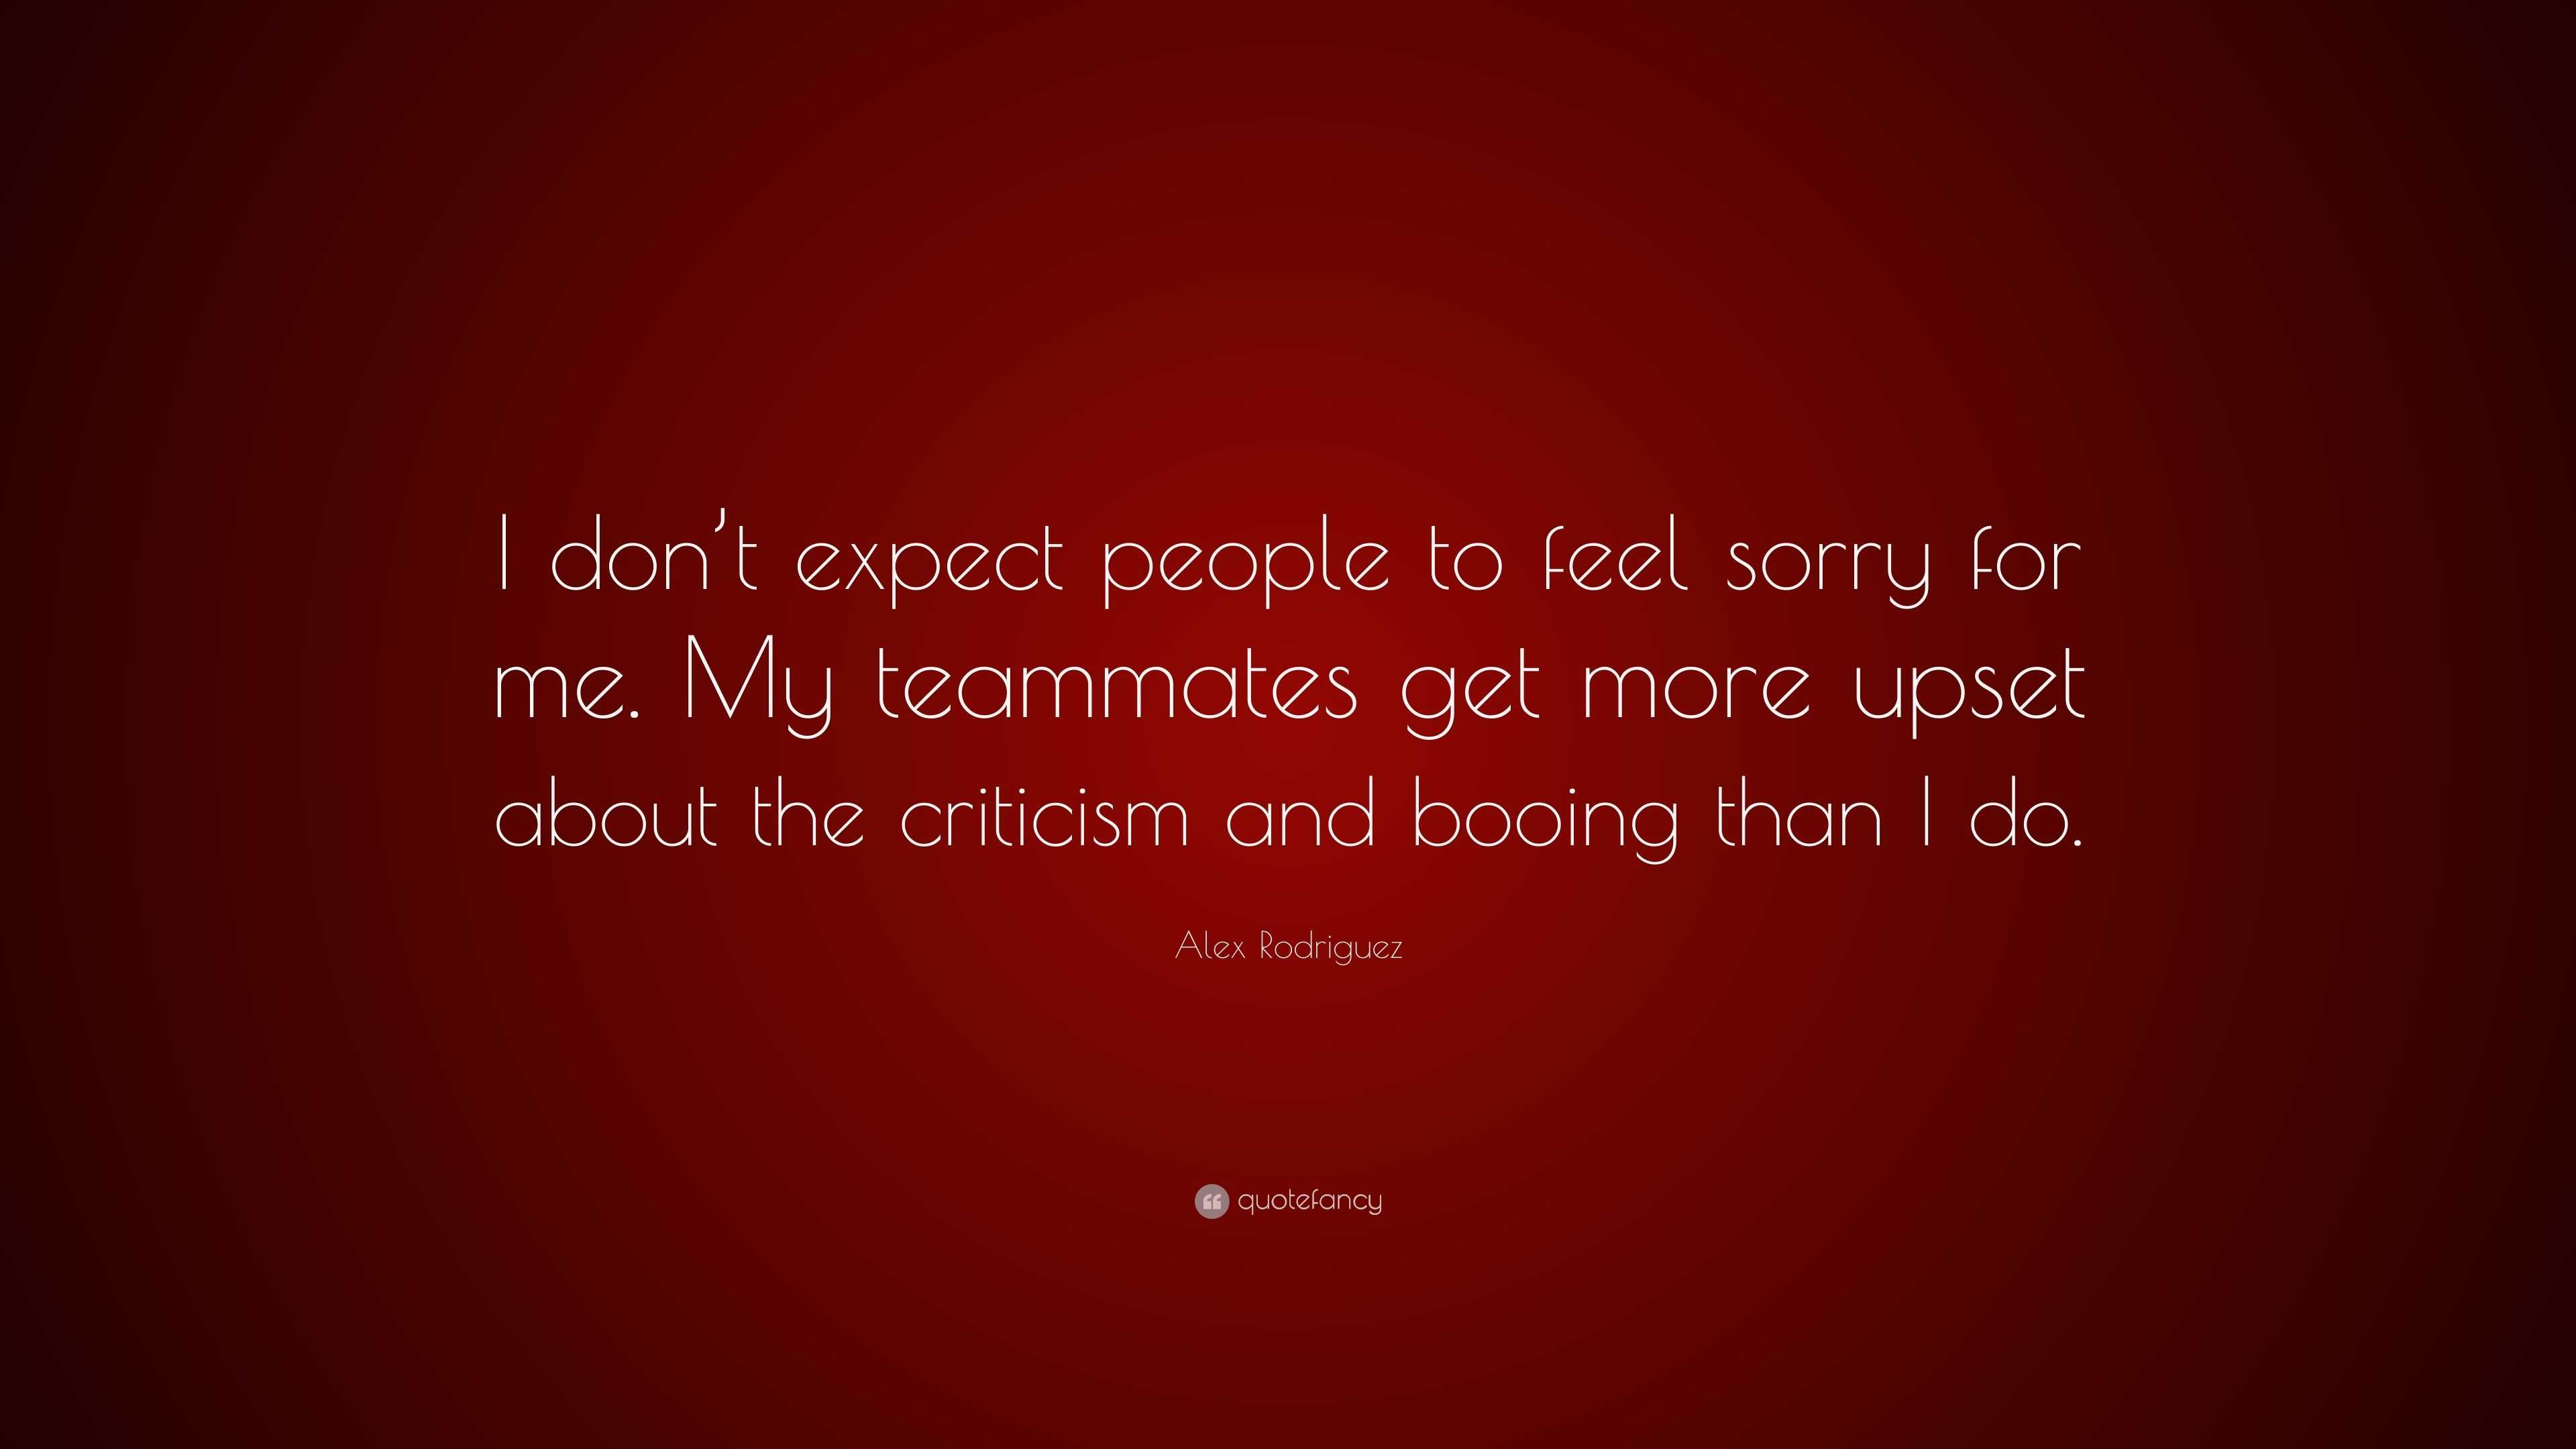 Alex Rodriguez Quote: "I don't expect people to feel sorry ...